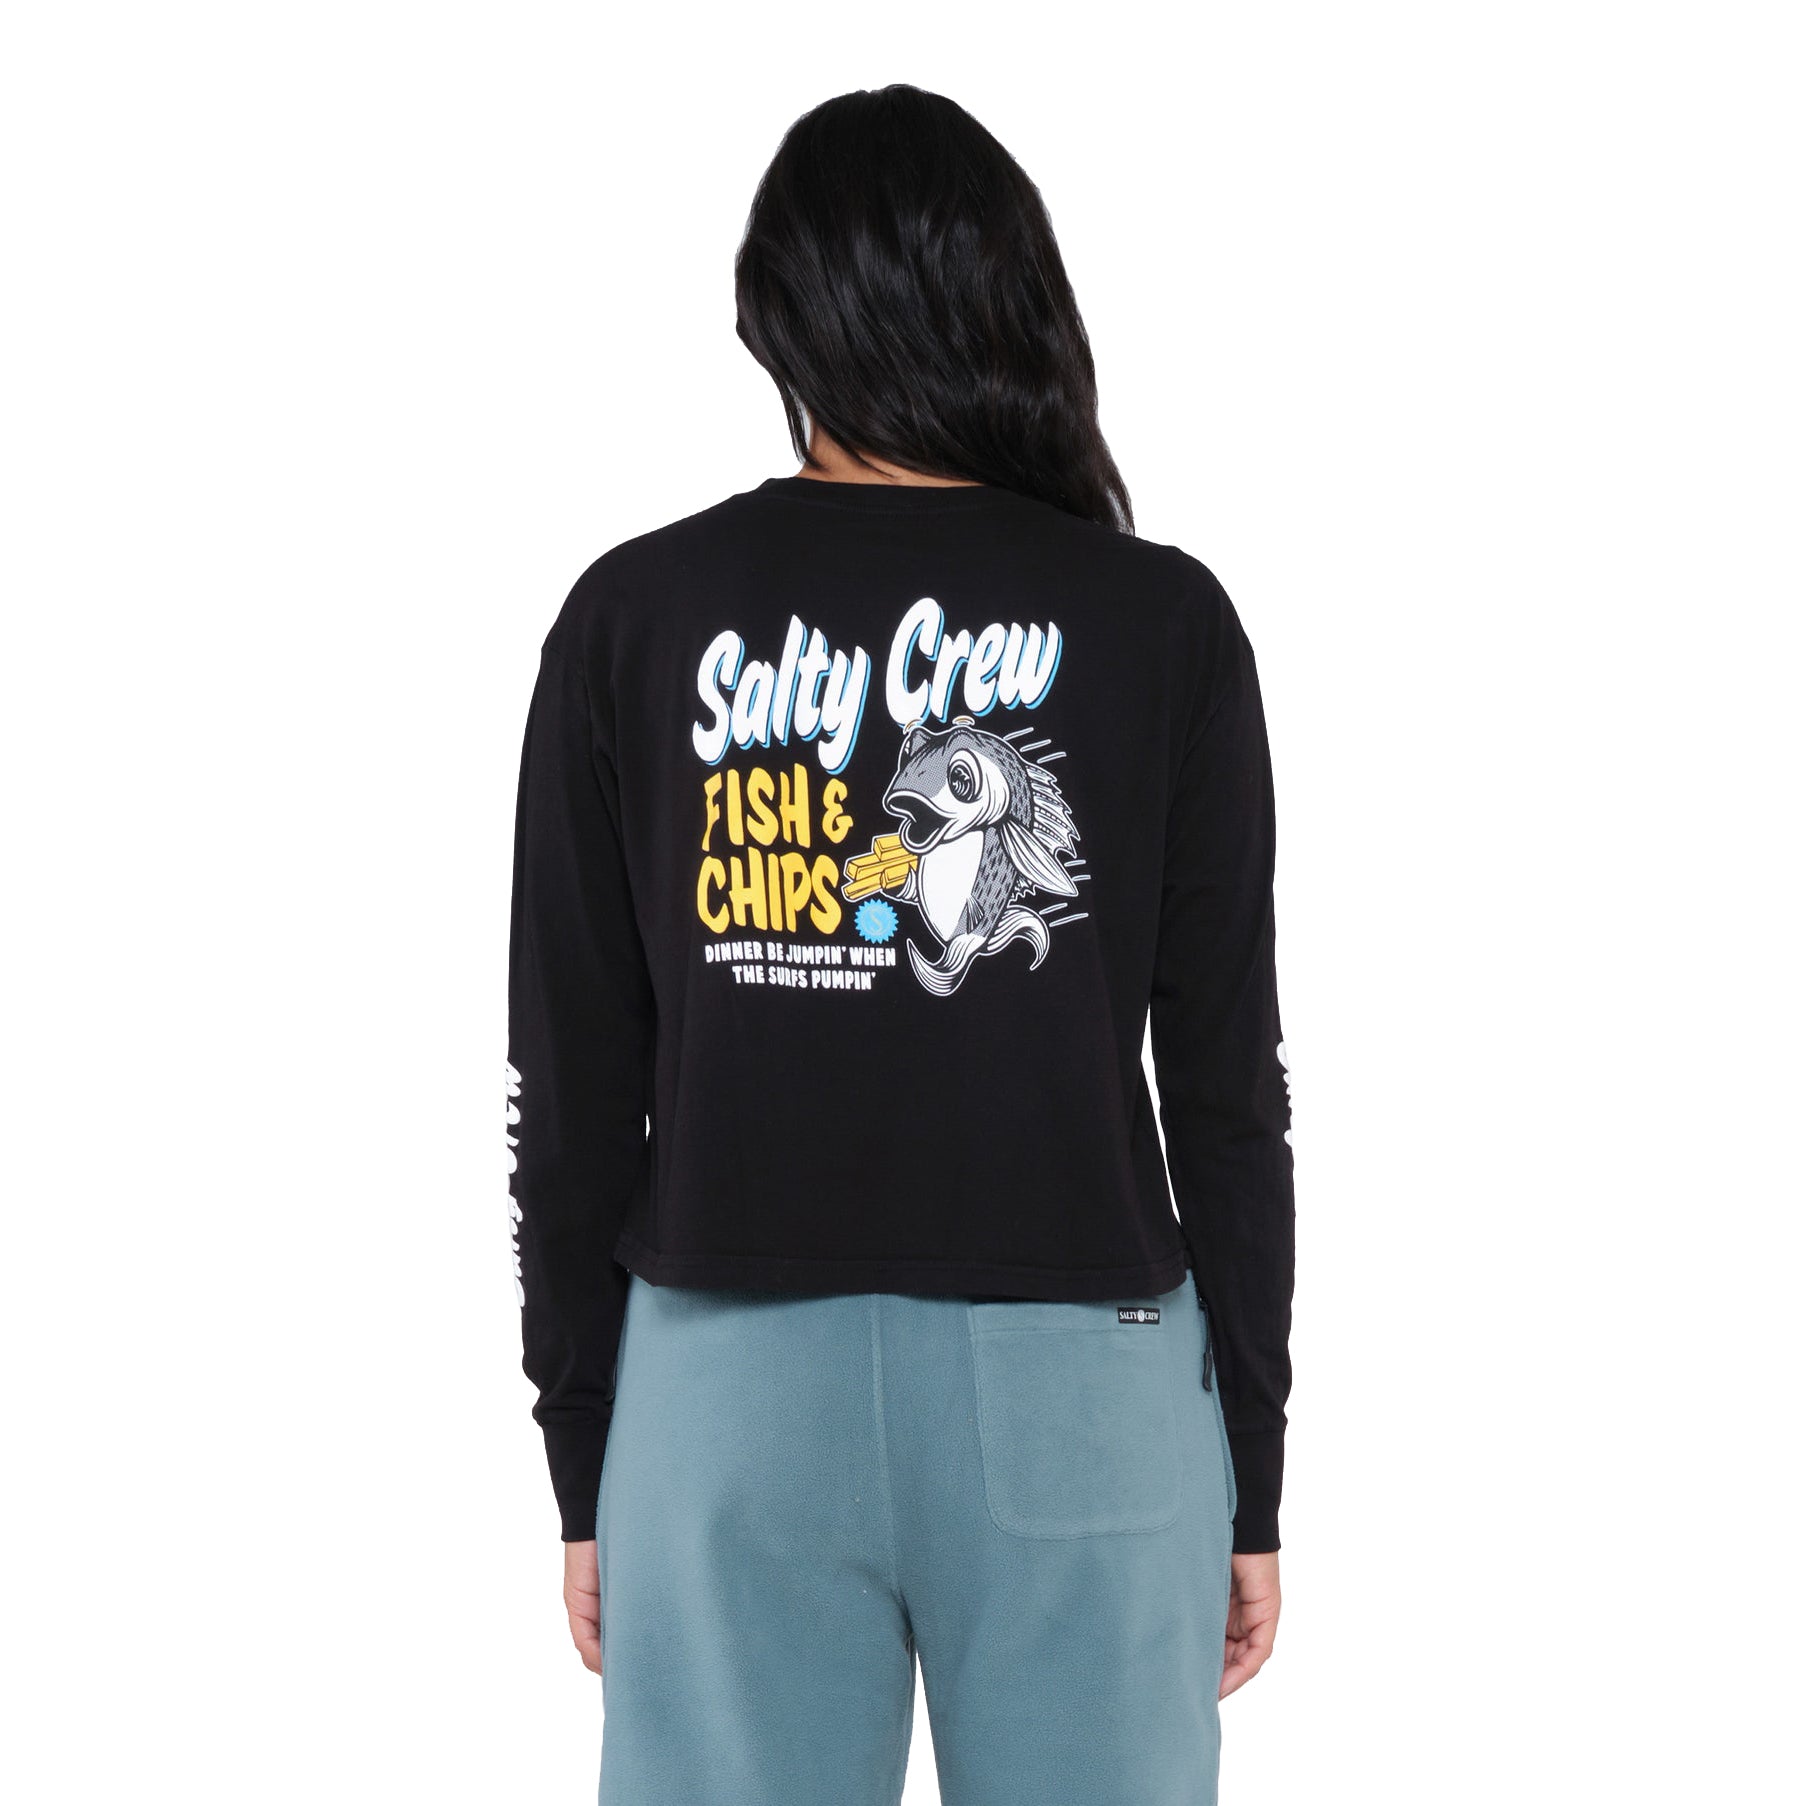 Salty Crew Fish and Chips Crop LS Tee  Black XS